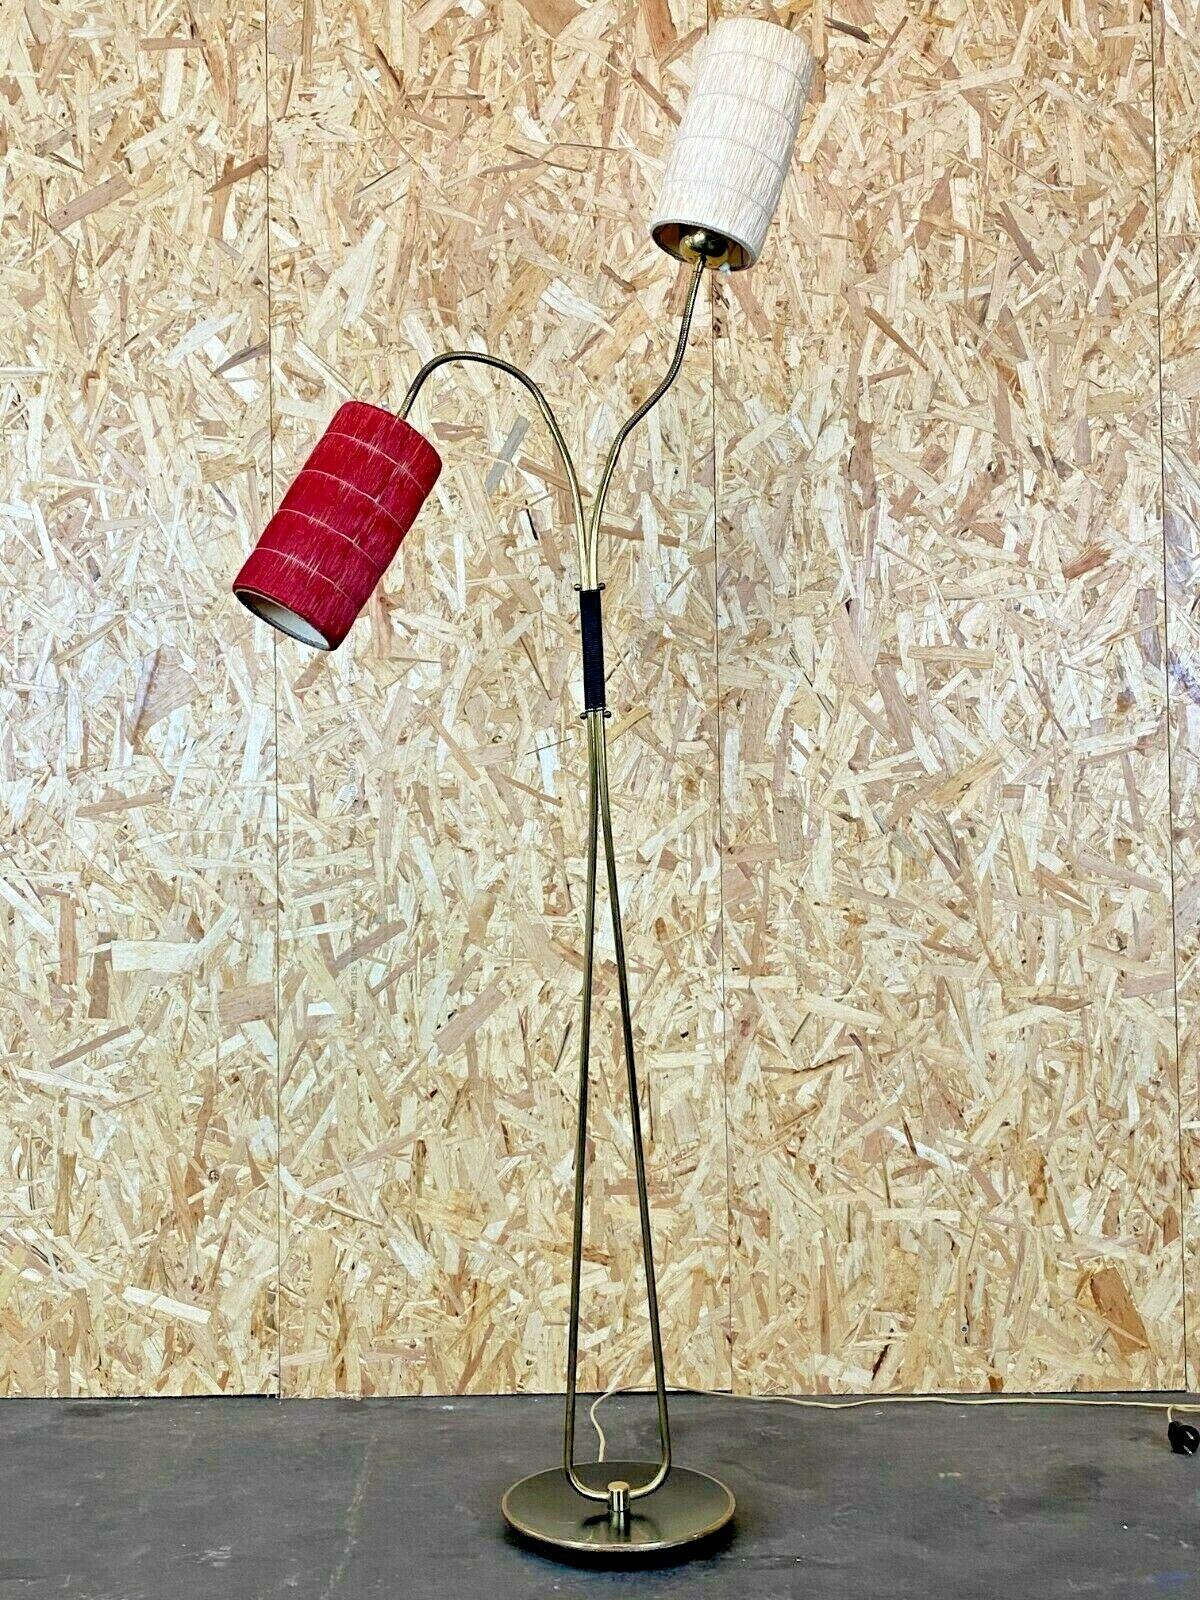 50s 60s lamp light floor lamp bag lamp mid century design 50s

Object: floor lamp

Manufacturer:

Condition: good

Age: around 1960-1970

Dimensions:

70cm x 25cm x 170cm

Other notes:

The pictures serve as part of the